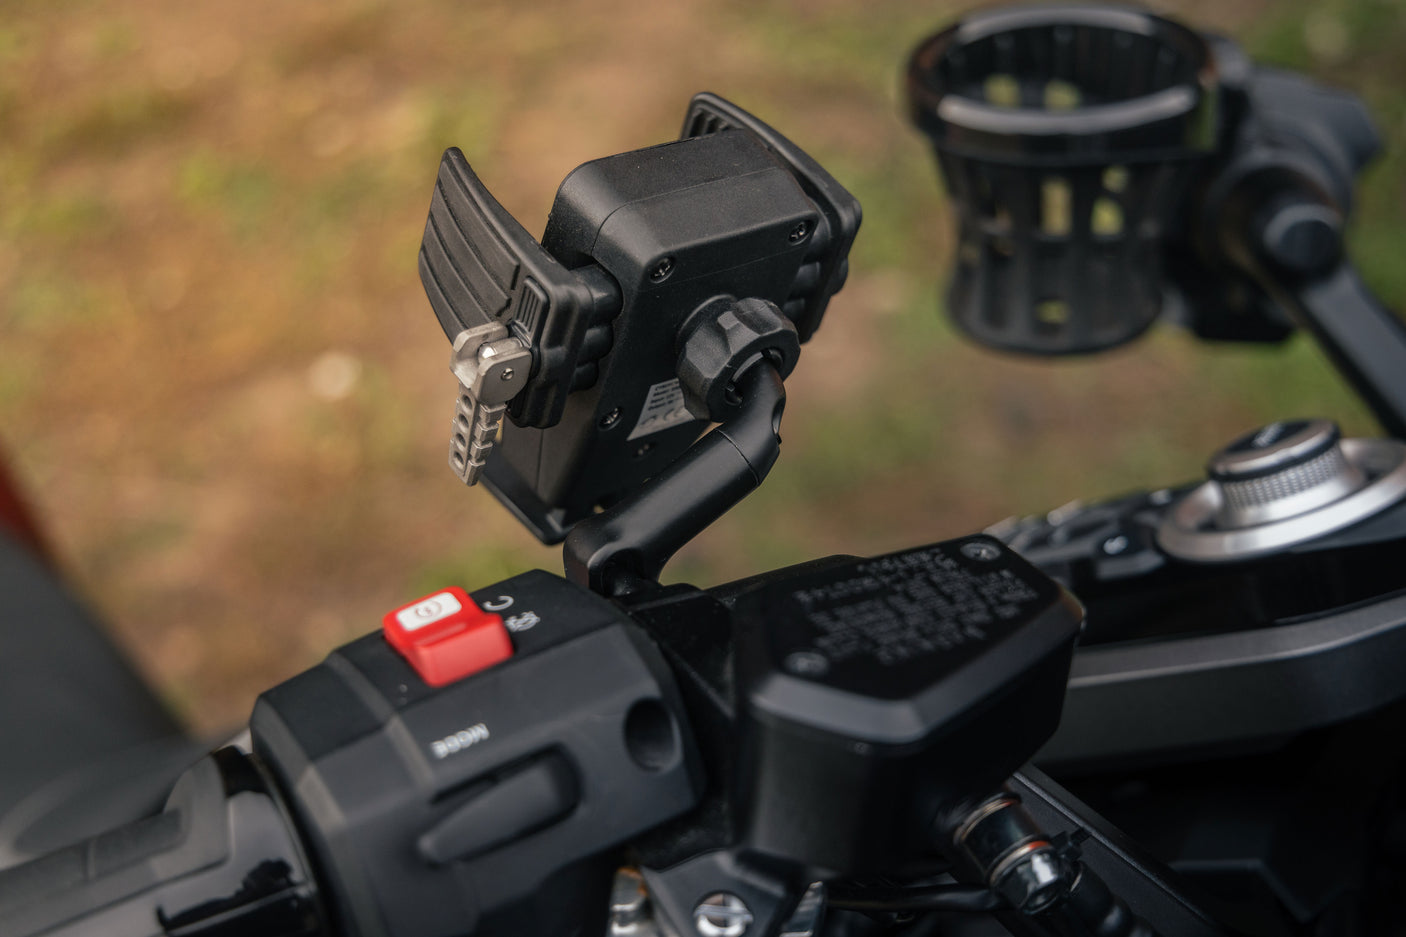 Offset Perch Mount with Cybercharger Phone Holder